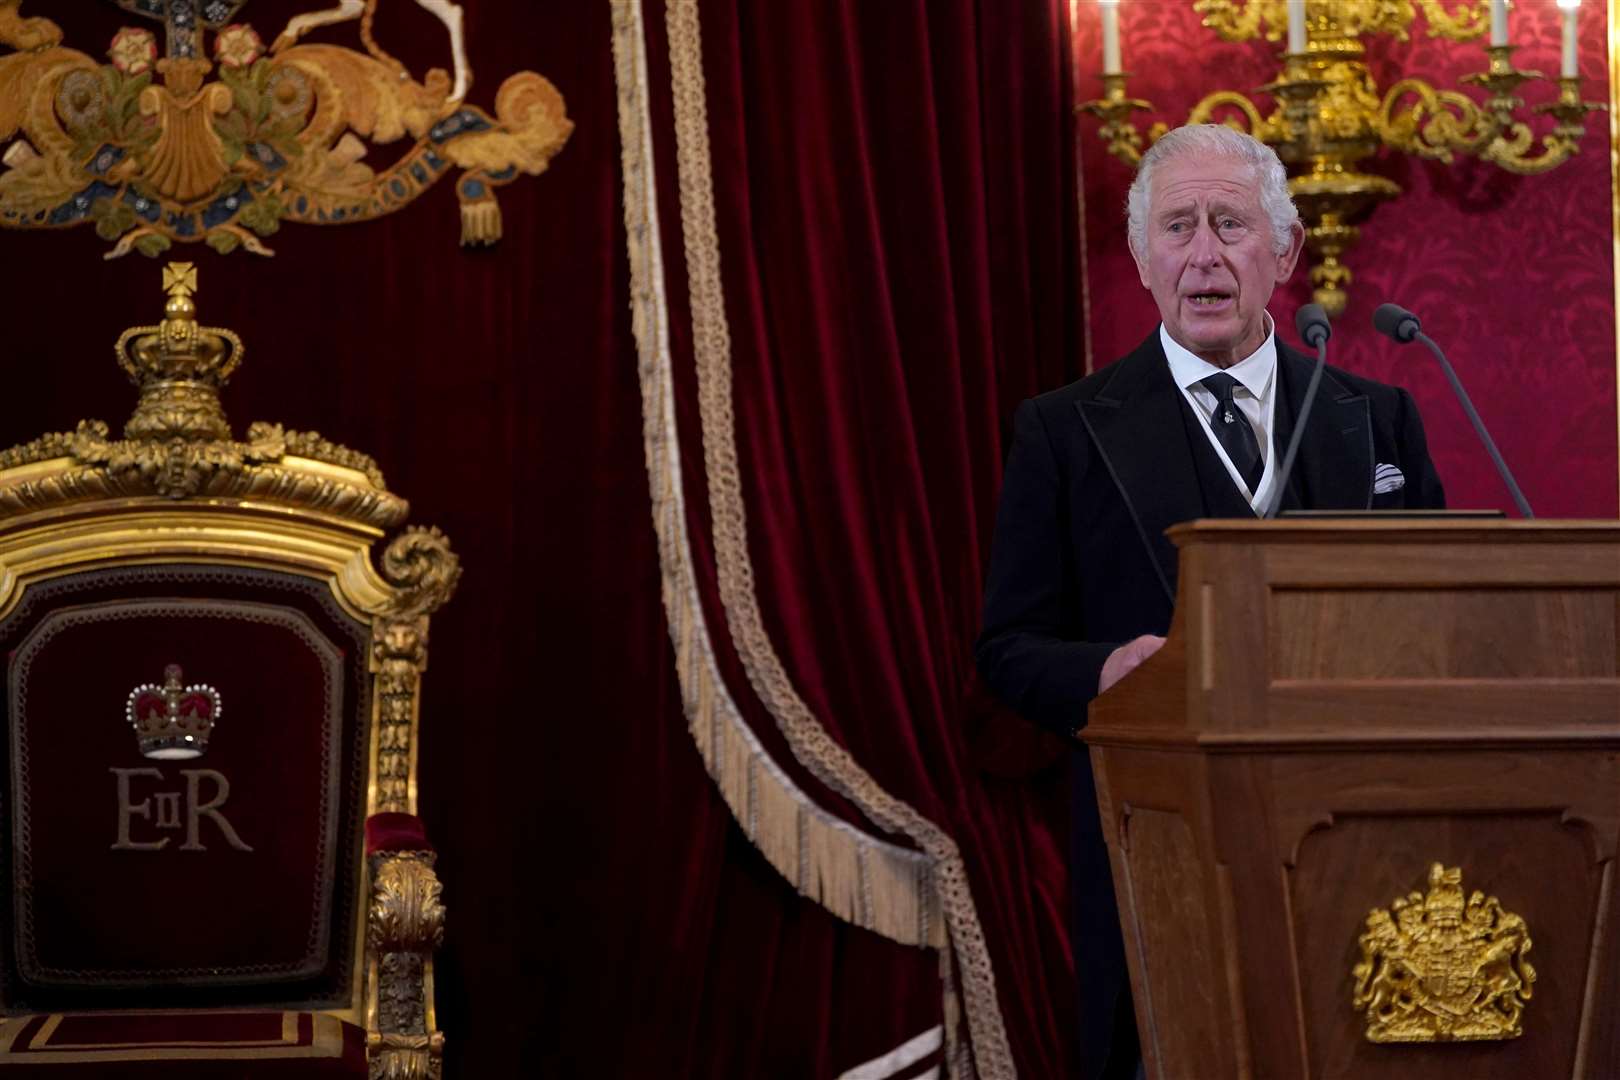 King Charles III during the Accession Council at St James’s Palace, London (Victoria Jones/PA)